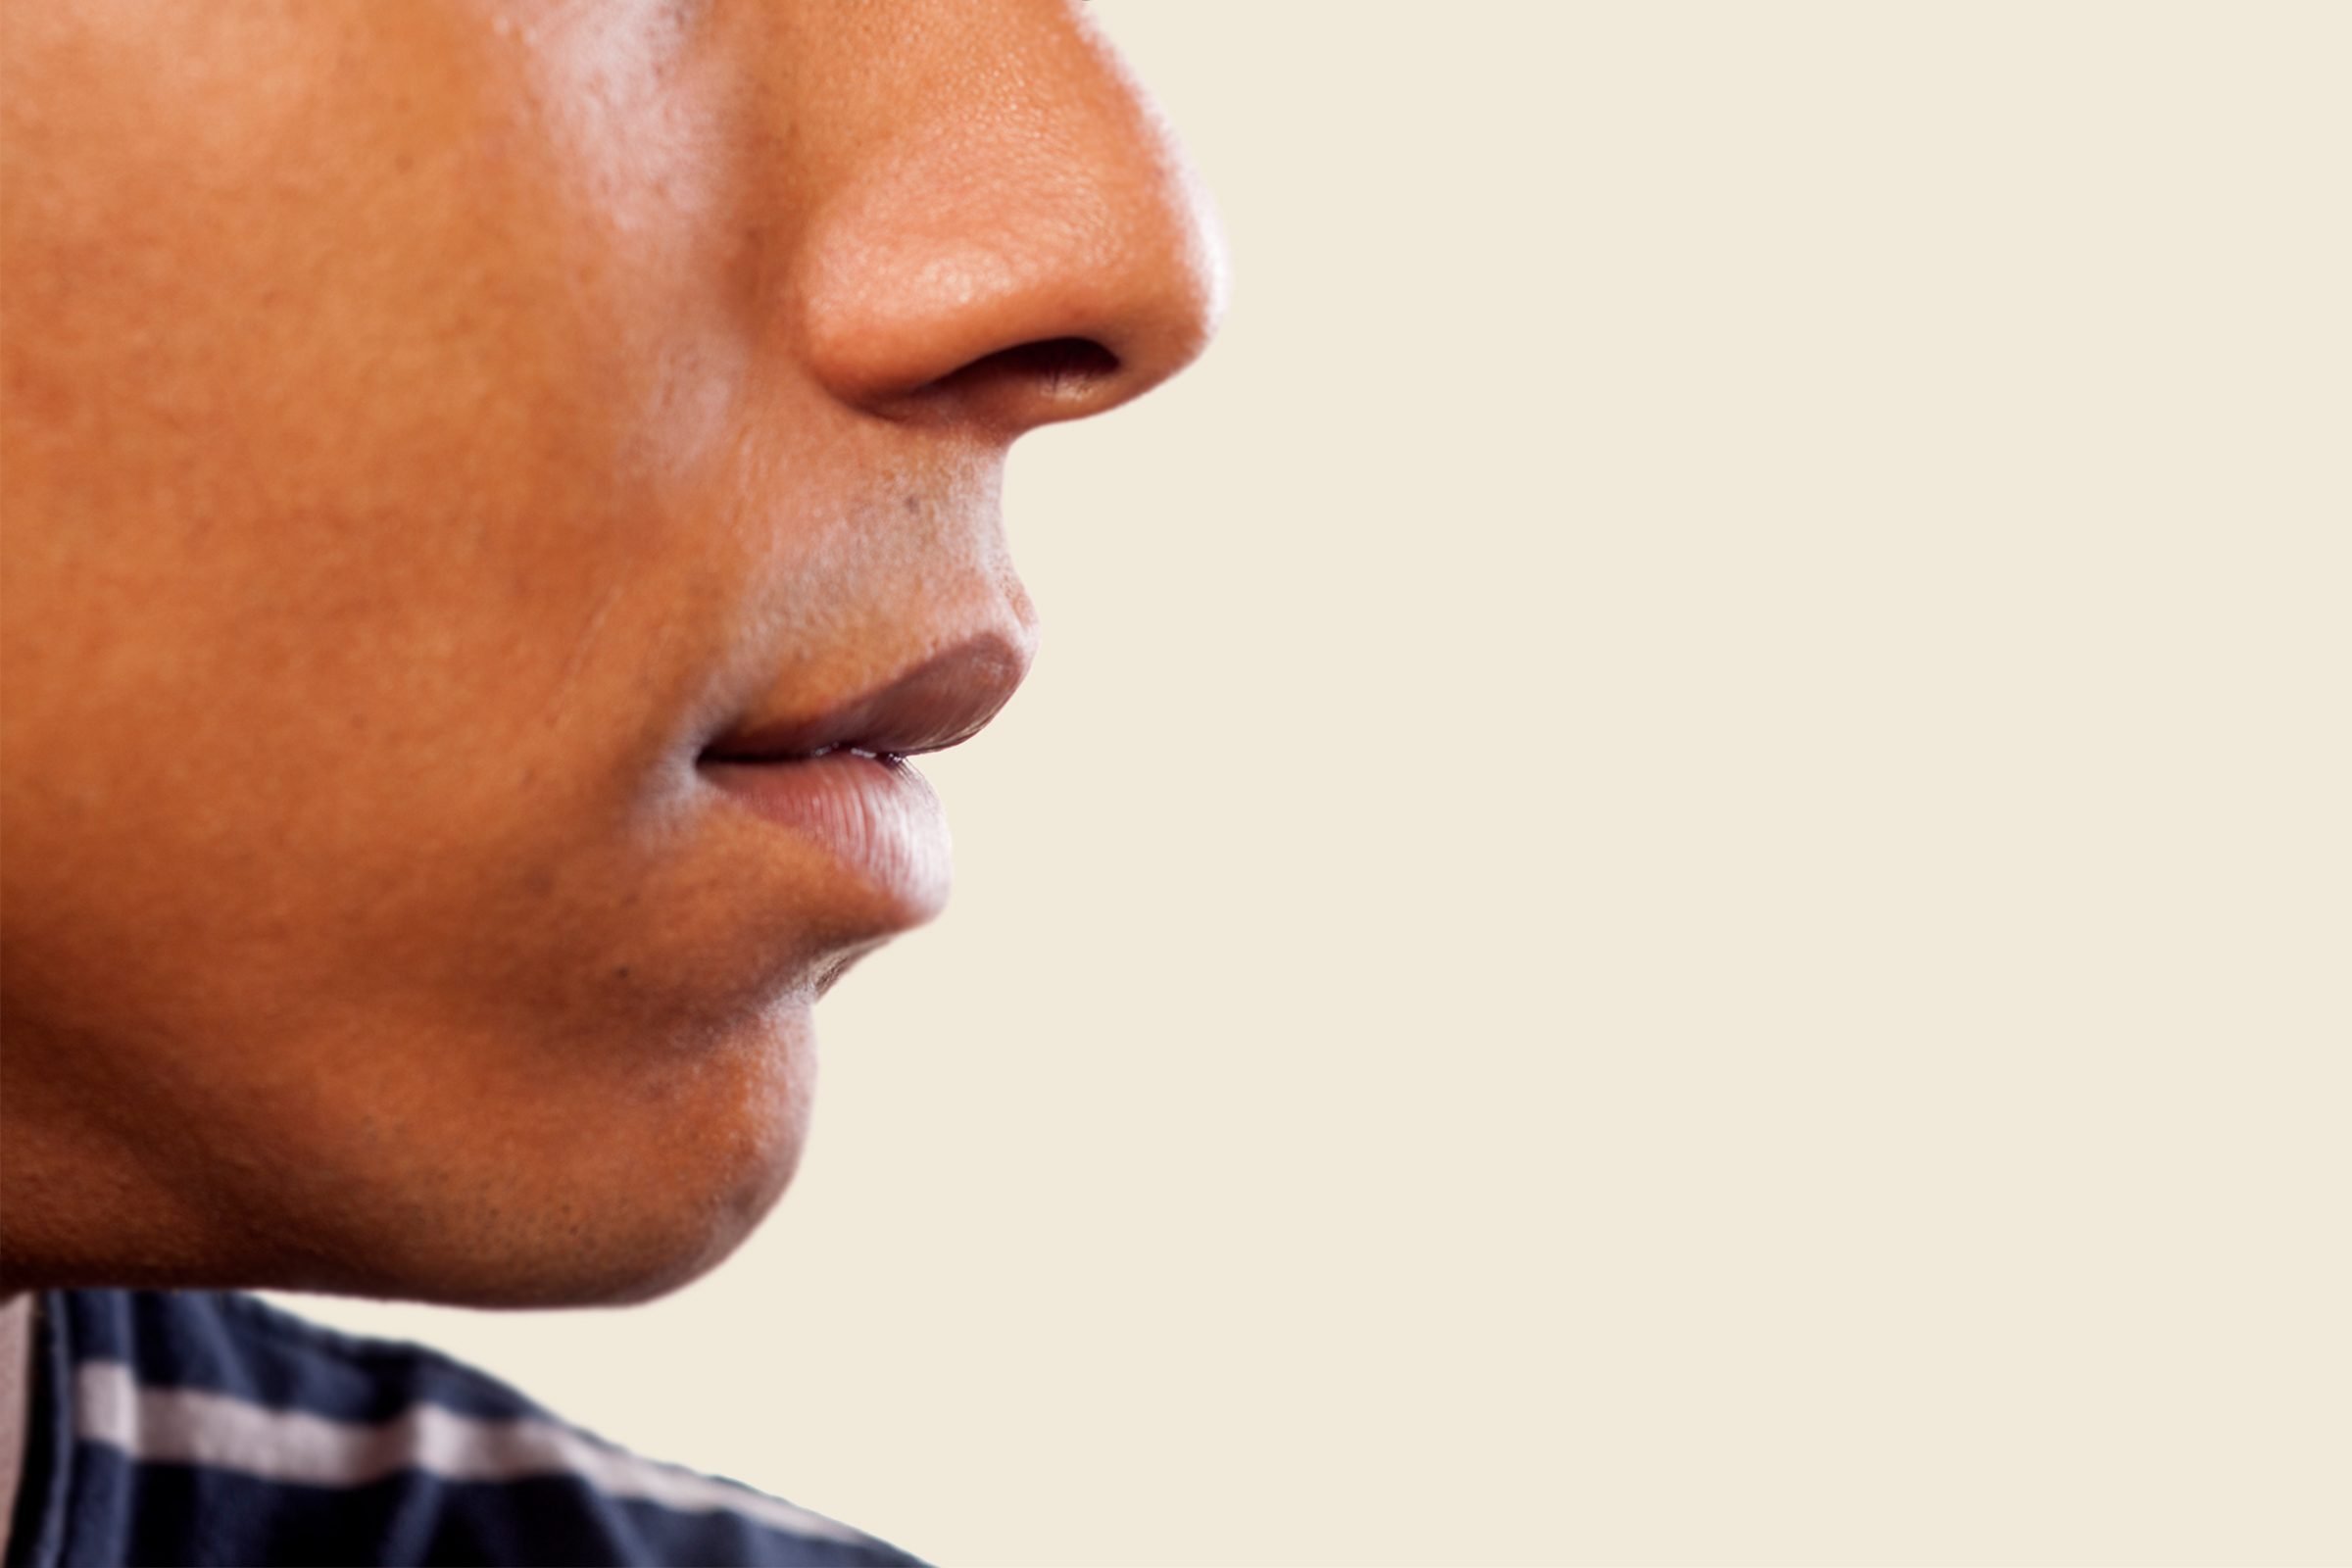 Nose Breathing vs. Mouth Breathing: Which Is Better?